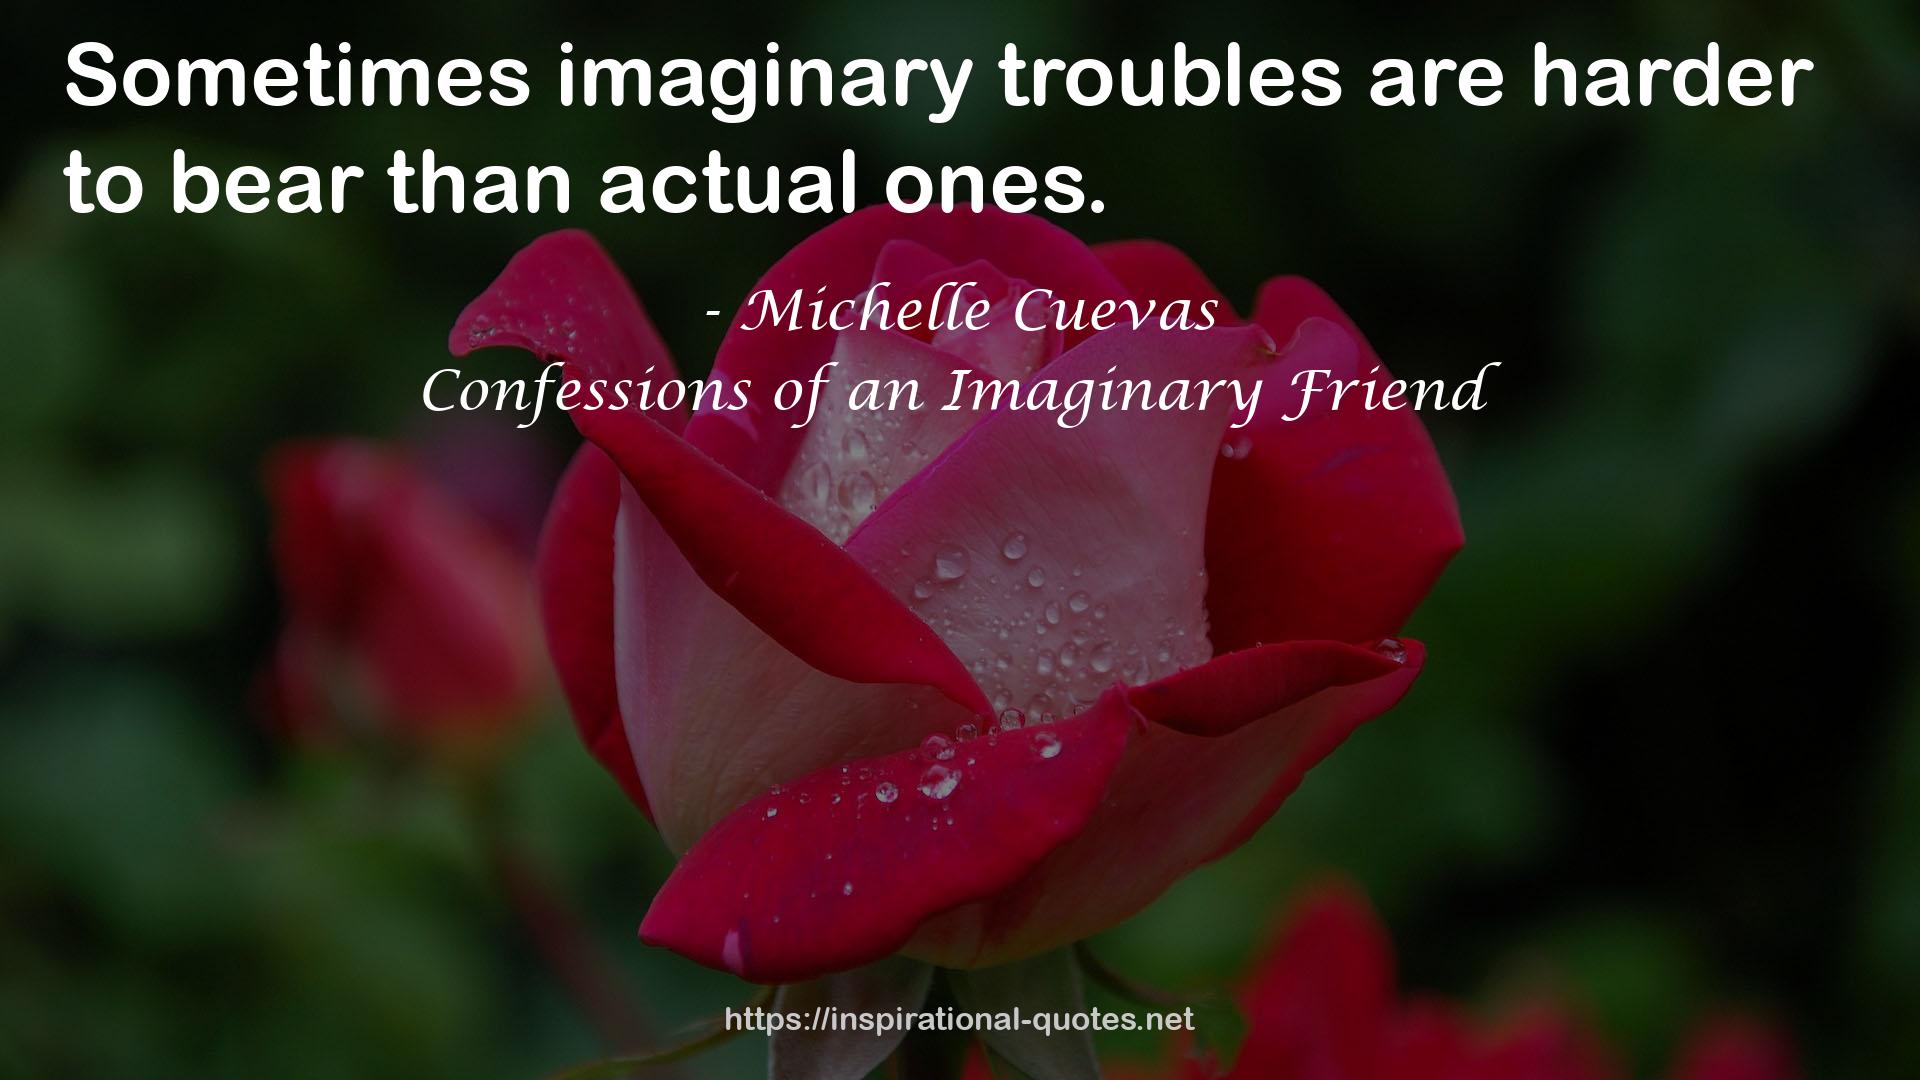 imaginary troubles  QUOTES